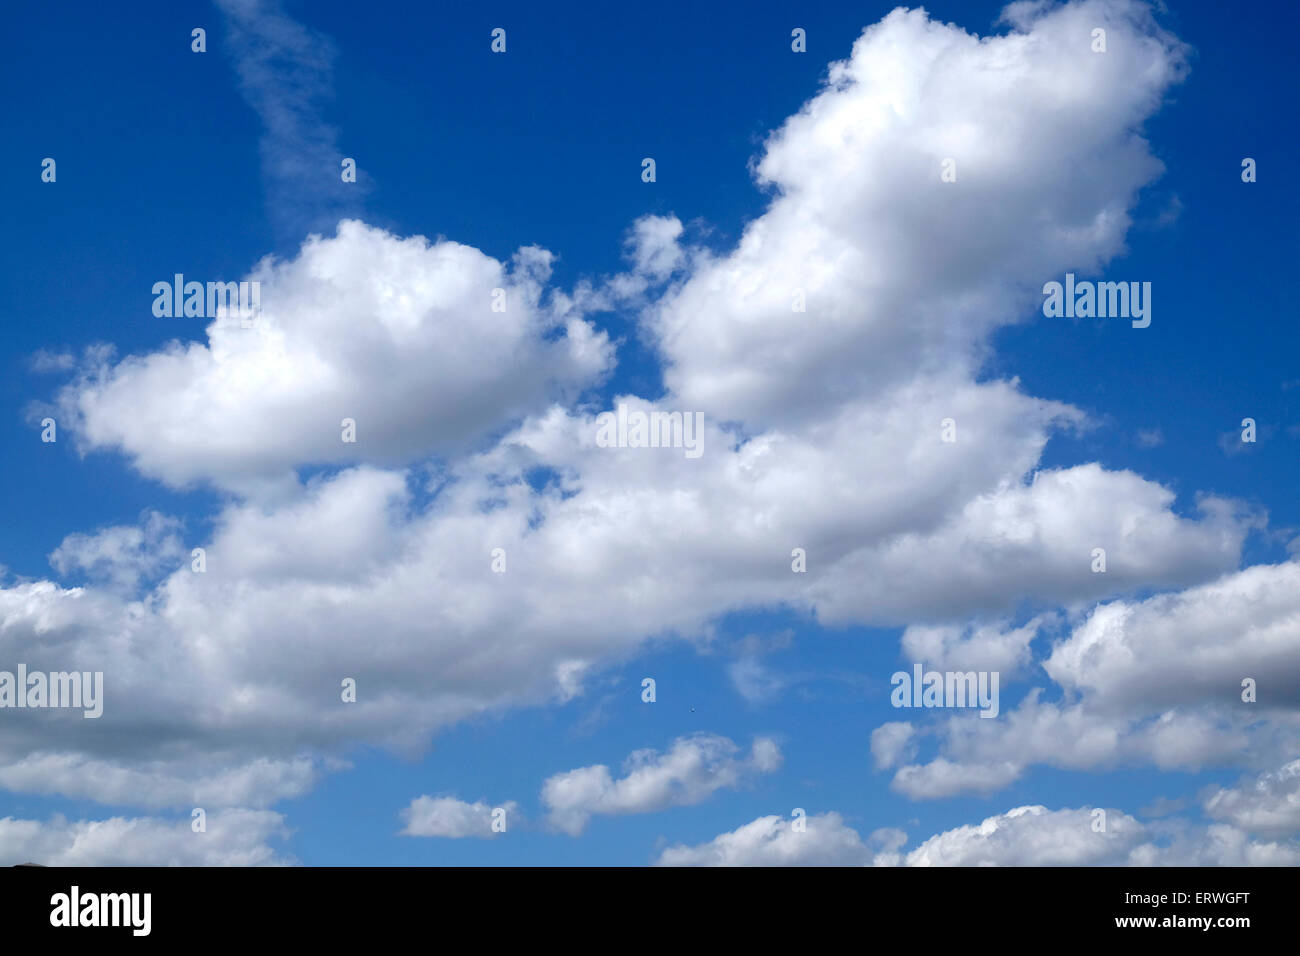 Clouds against a blue sky Stock Photo